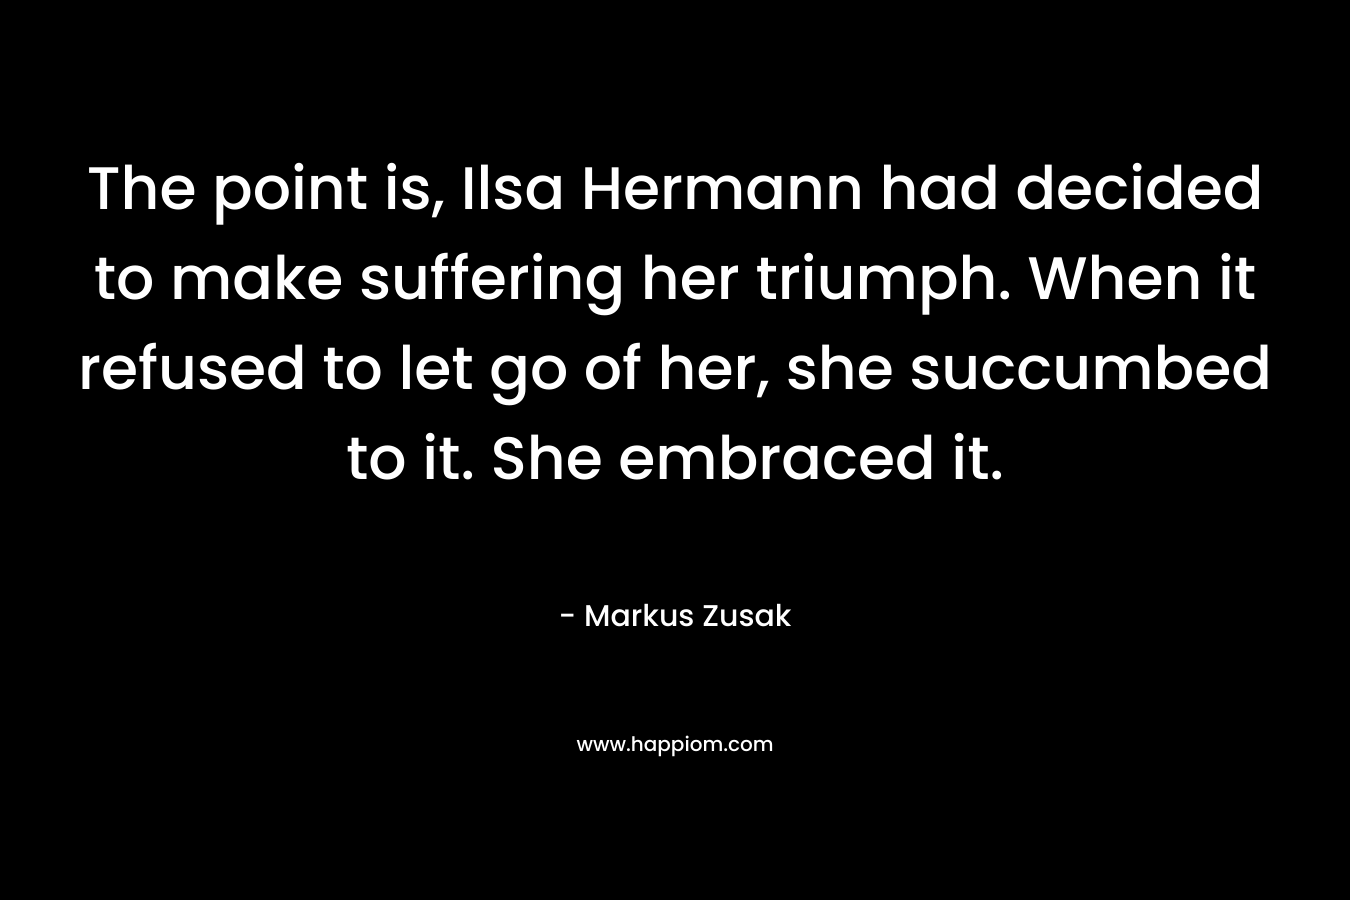 The point is, Ilsa Hermann had decided to make suffering her triumph. When it refused to let go of her, she succumbed to it. She embraced it.  – Markus Zusak